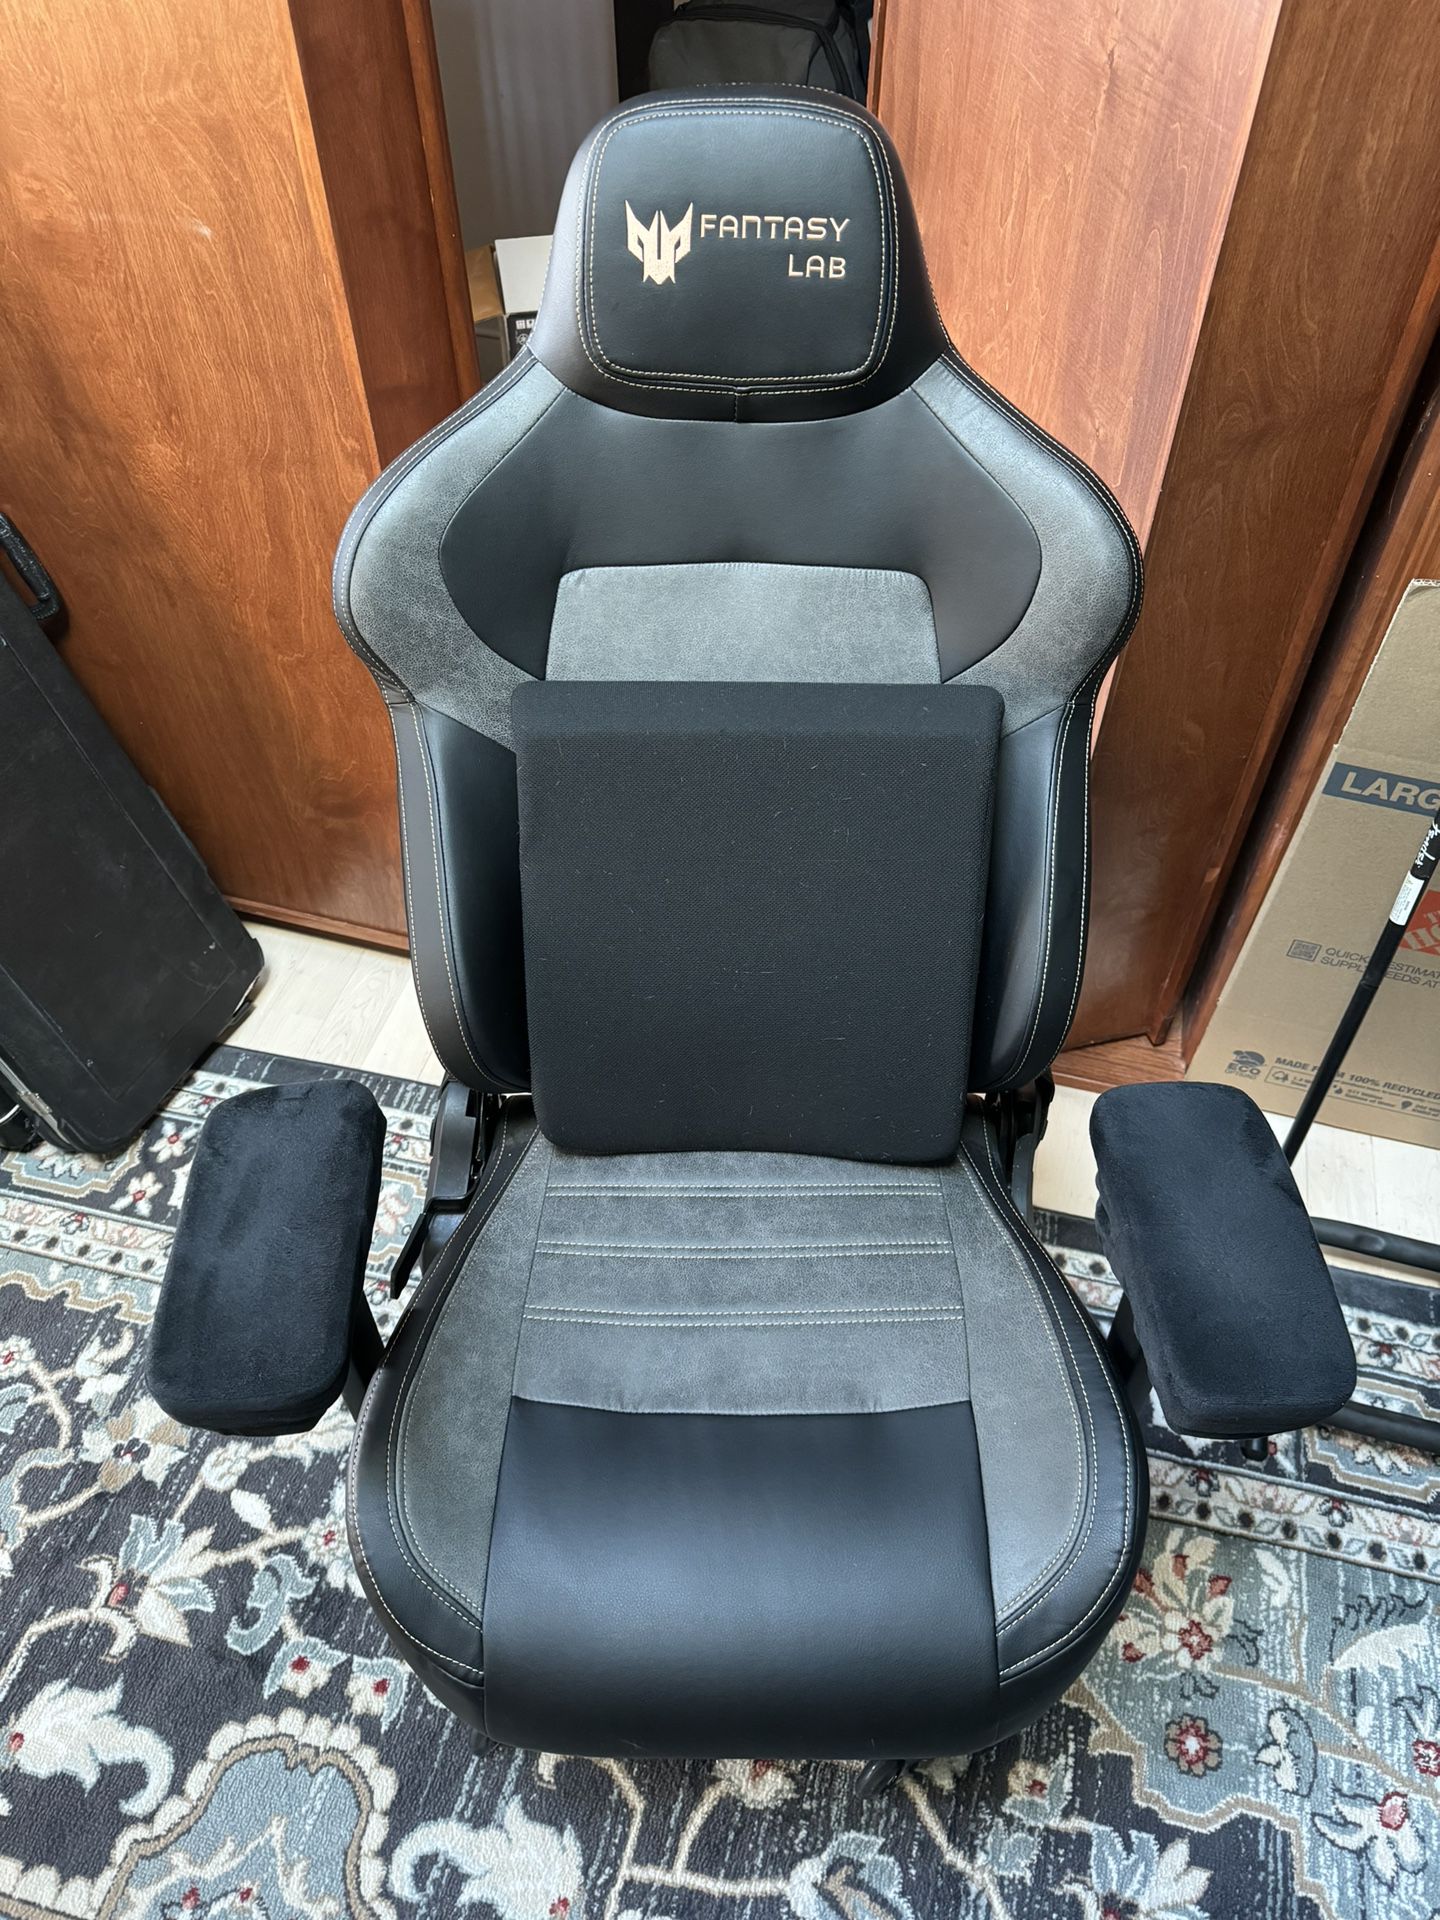 Fantasy Lab Gaming / Office Chair